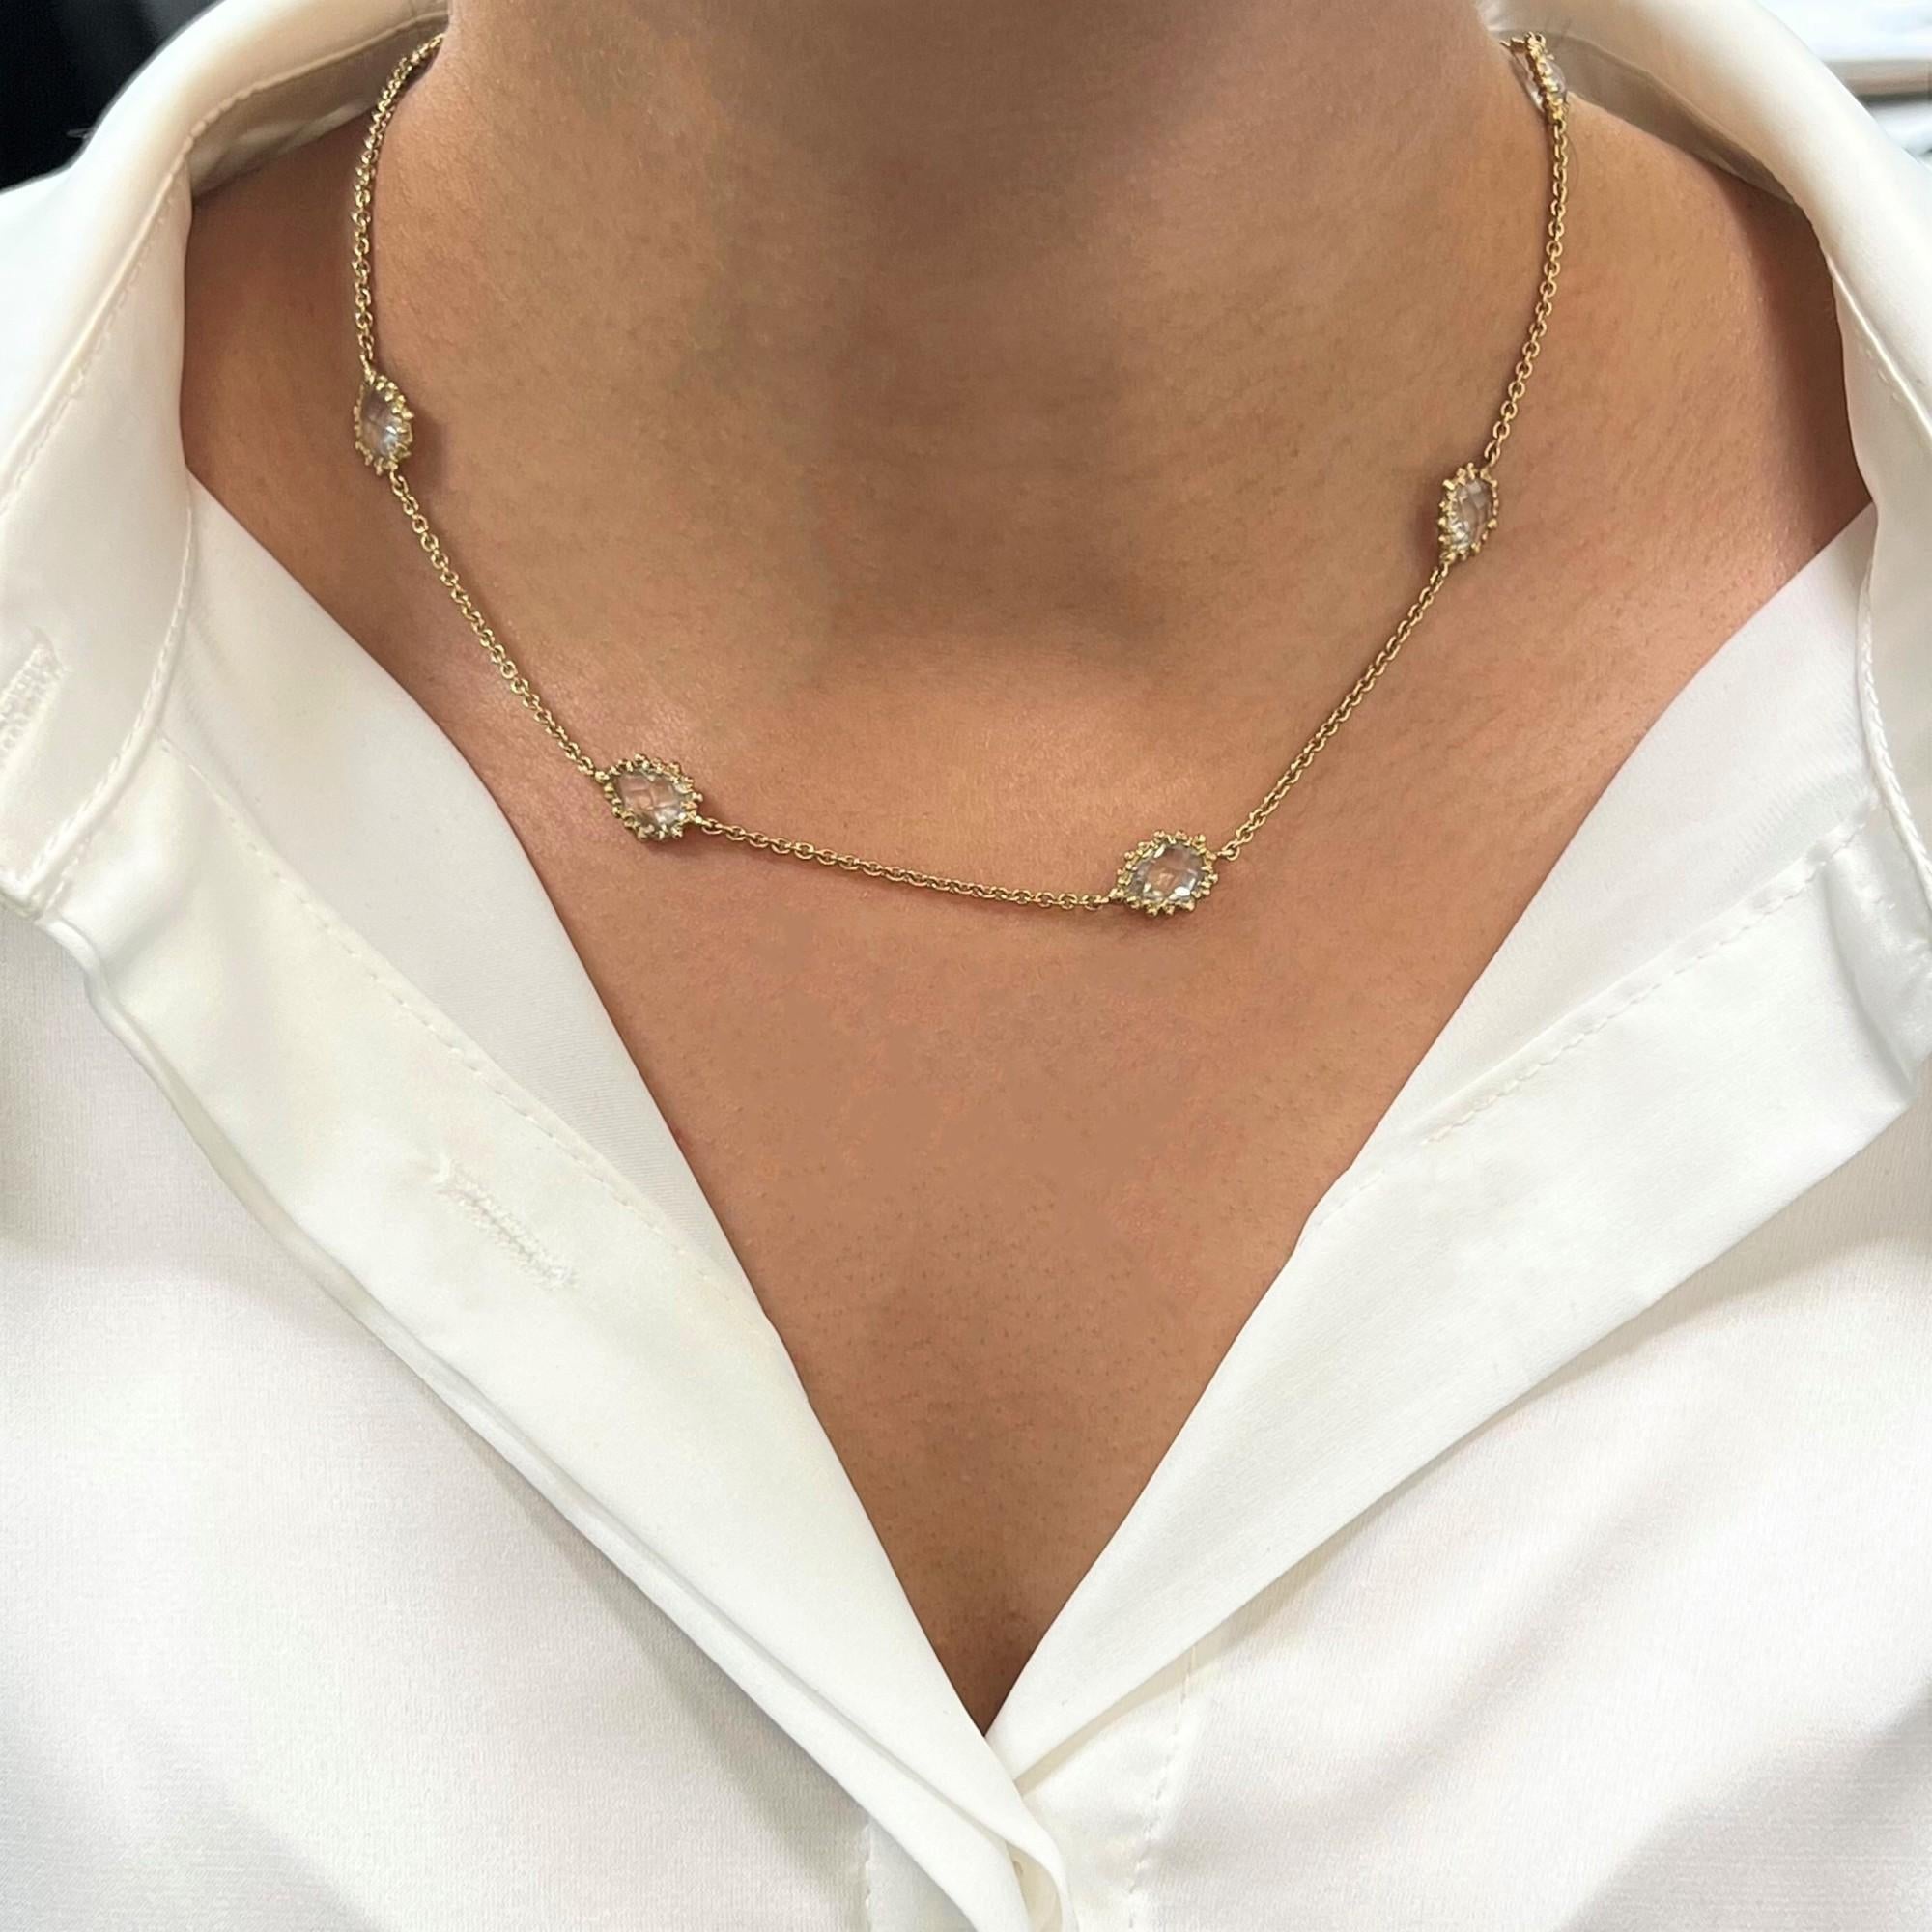 This necklace is crafted in 14k yellow gold and encrusted with 7 white clear quartz stones. The length of the necklace is 16 inches. Total weight: 5.6 gms. Comes with a gift box and an appraisal card.